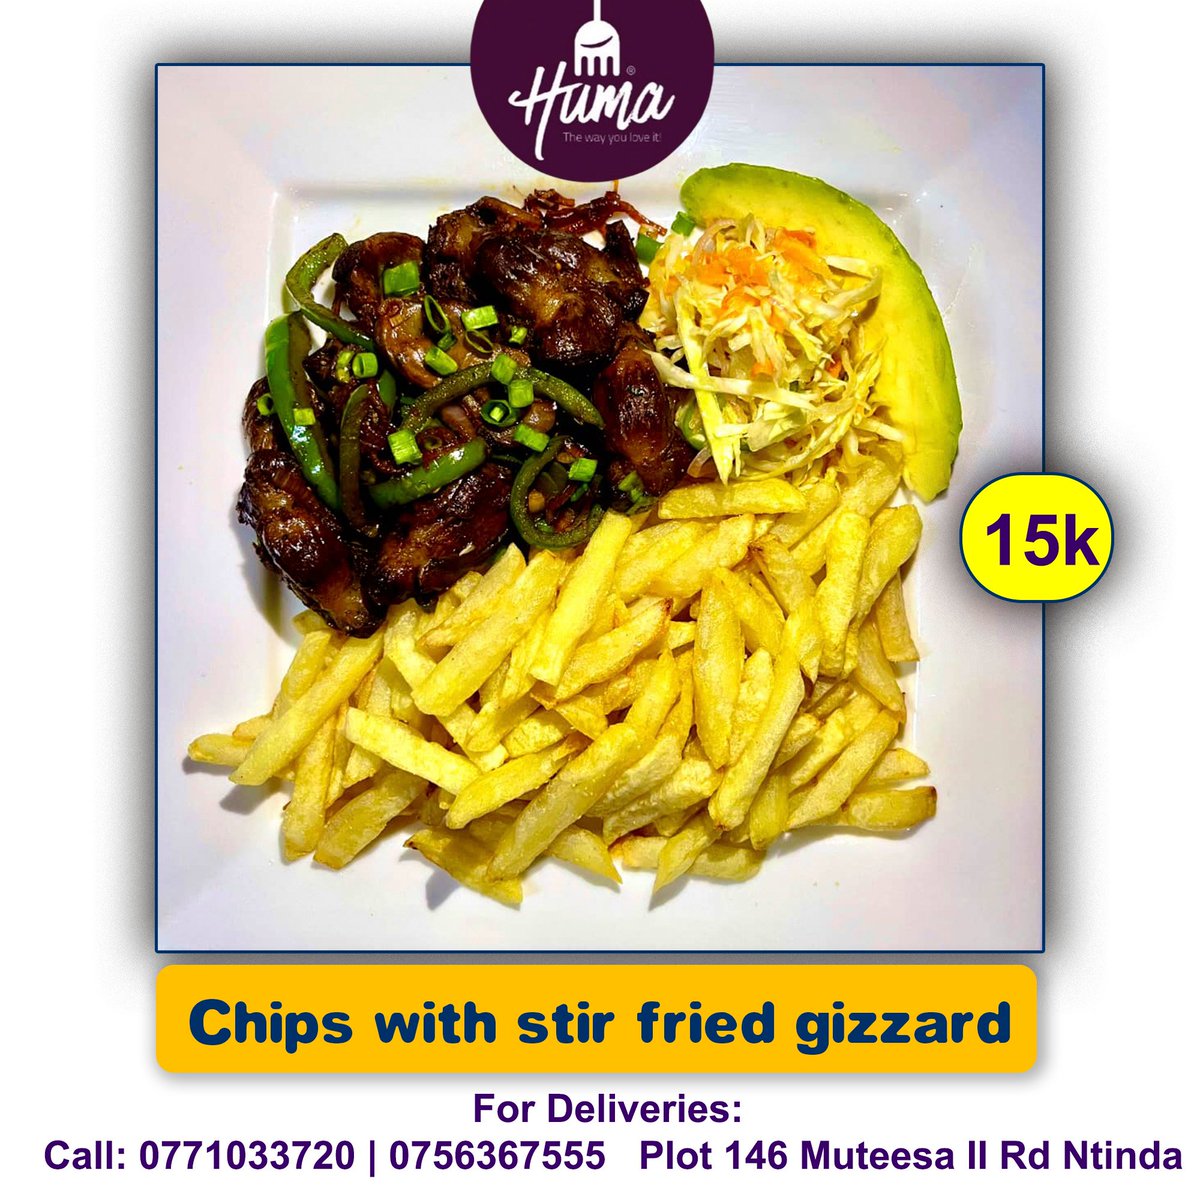 '🍗✨ Want something tasty? Huma Cafe's Wet Fried Gizzard is the answer! Served with posho or fries, it's a delicious treat ready for you at only 15k

Call 0771033720 | 0756367555 and make your day yummy! 🚚
#WetFriedGizzard #DailyDelight #HumaCafe #HumaUg